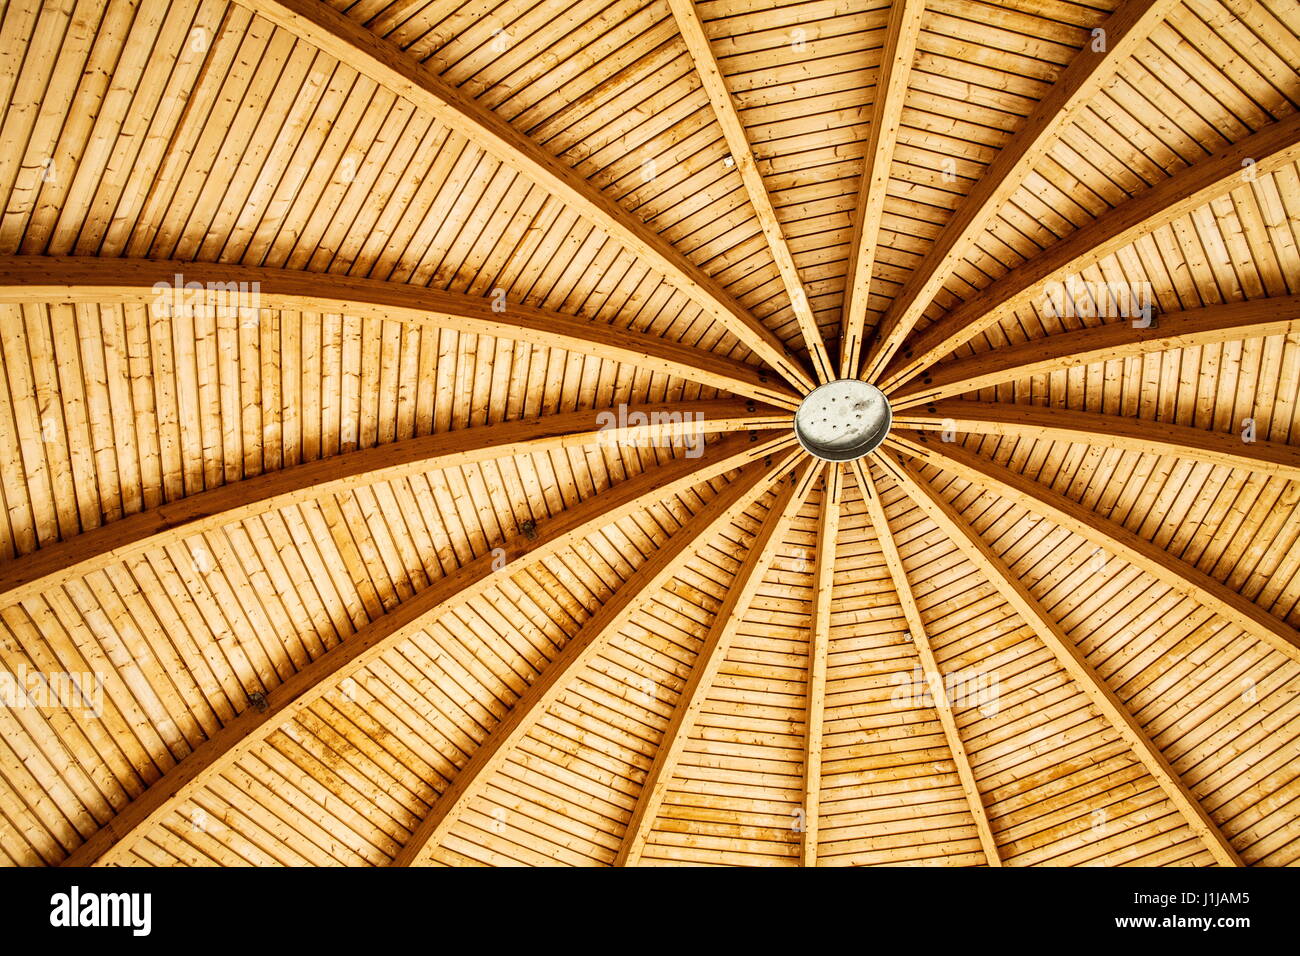 Wooden Ceiling of a large canopy Stock Photo